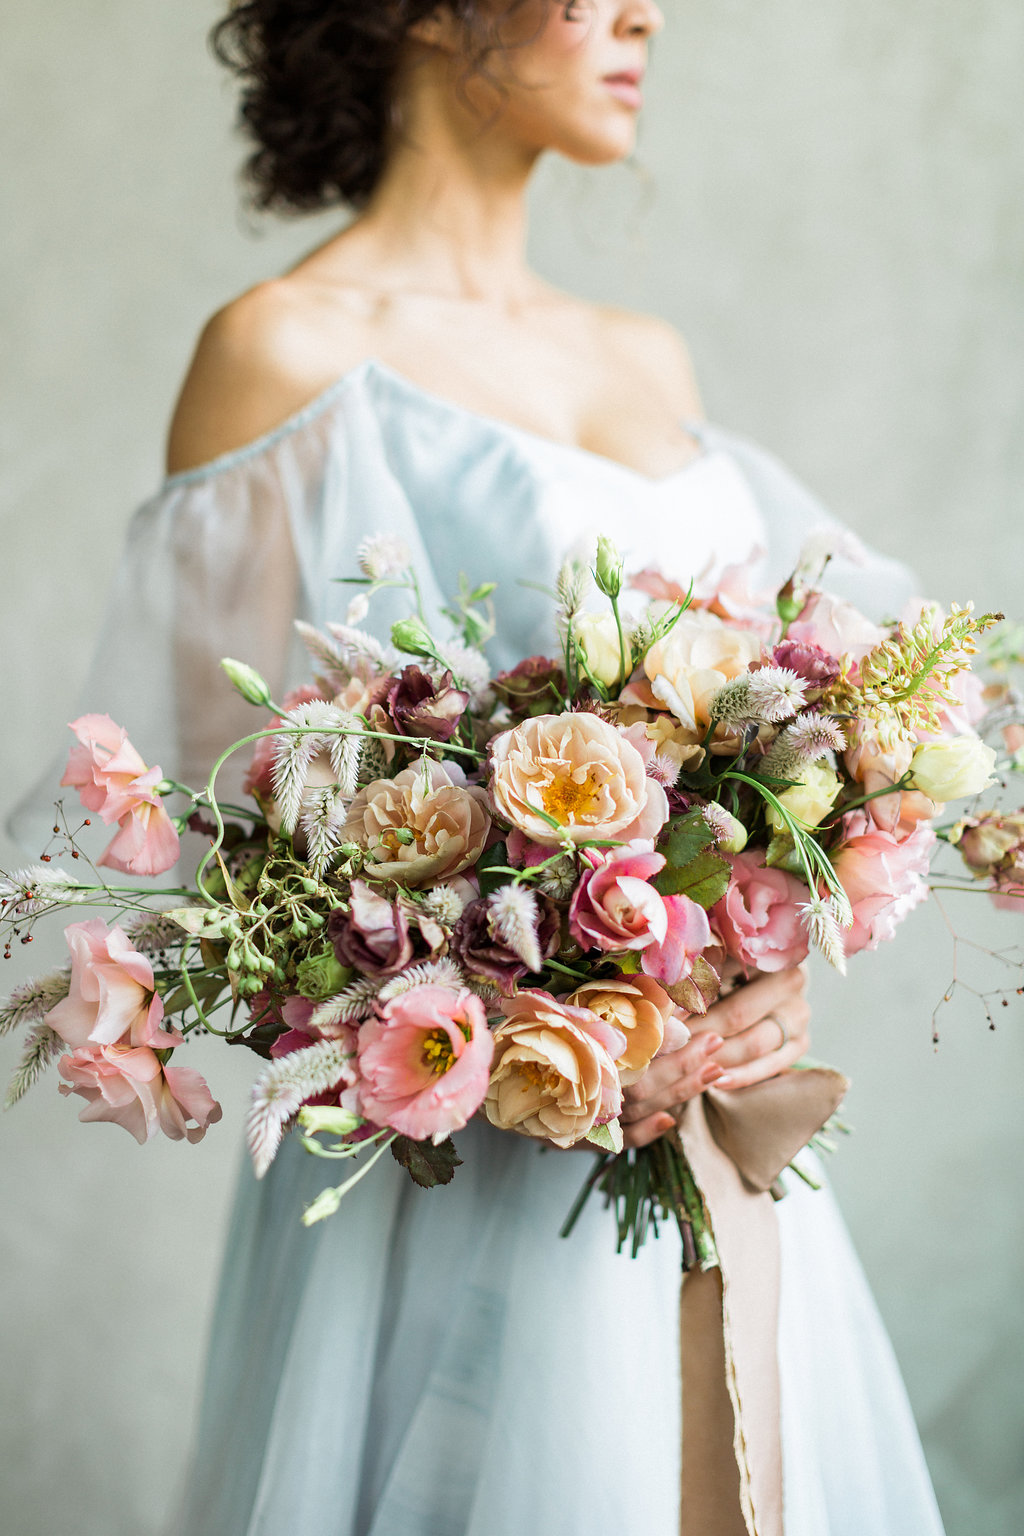 soft and romantic fine art wedding bouquets - https://ruffledblog.com/cloudy-day-wedding-inspiration-with-a-hand-painted-bridal-gown